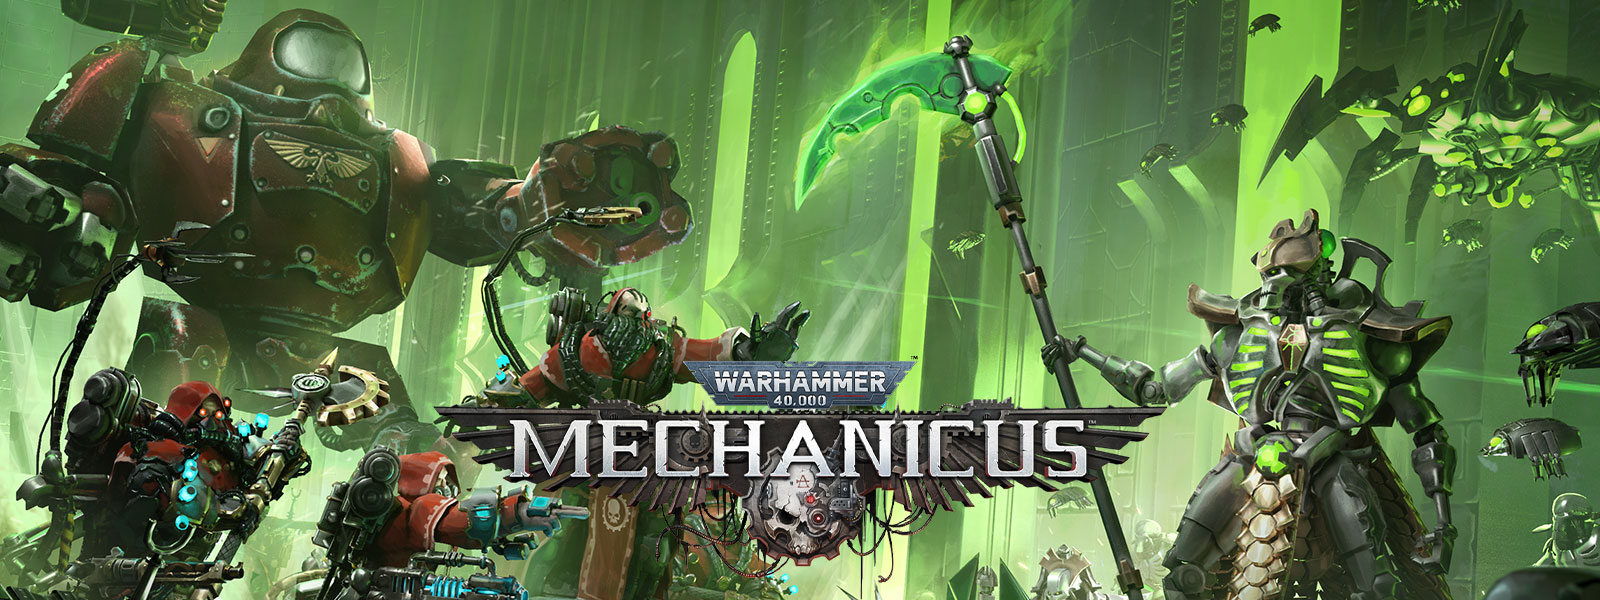 Warhammer 40,000: Mechanicus, Top high-tech armies square off for battle.